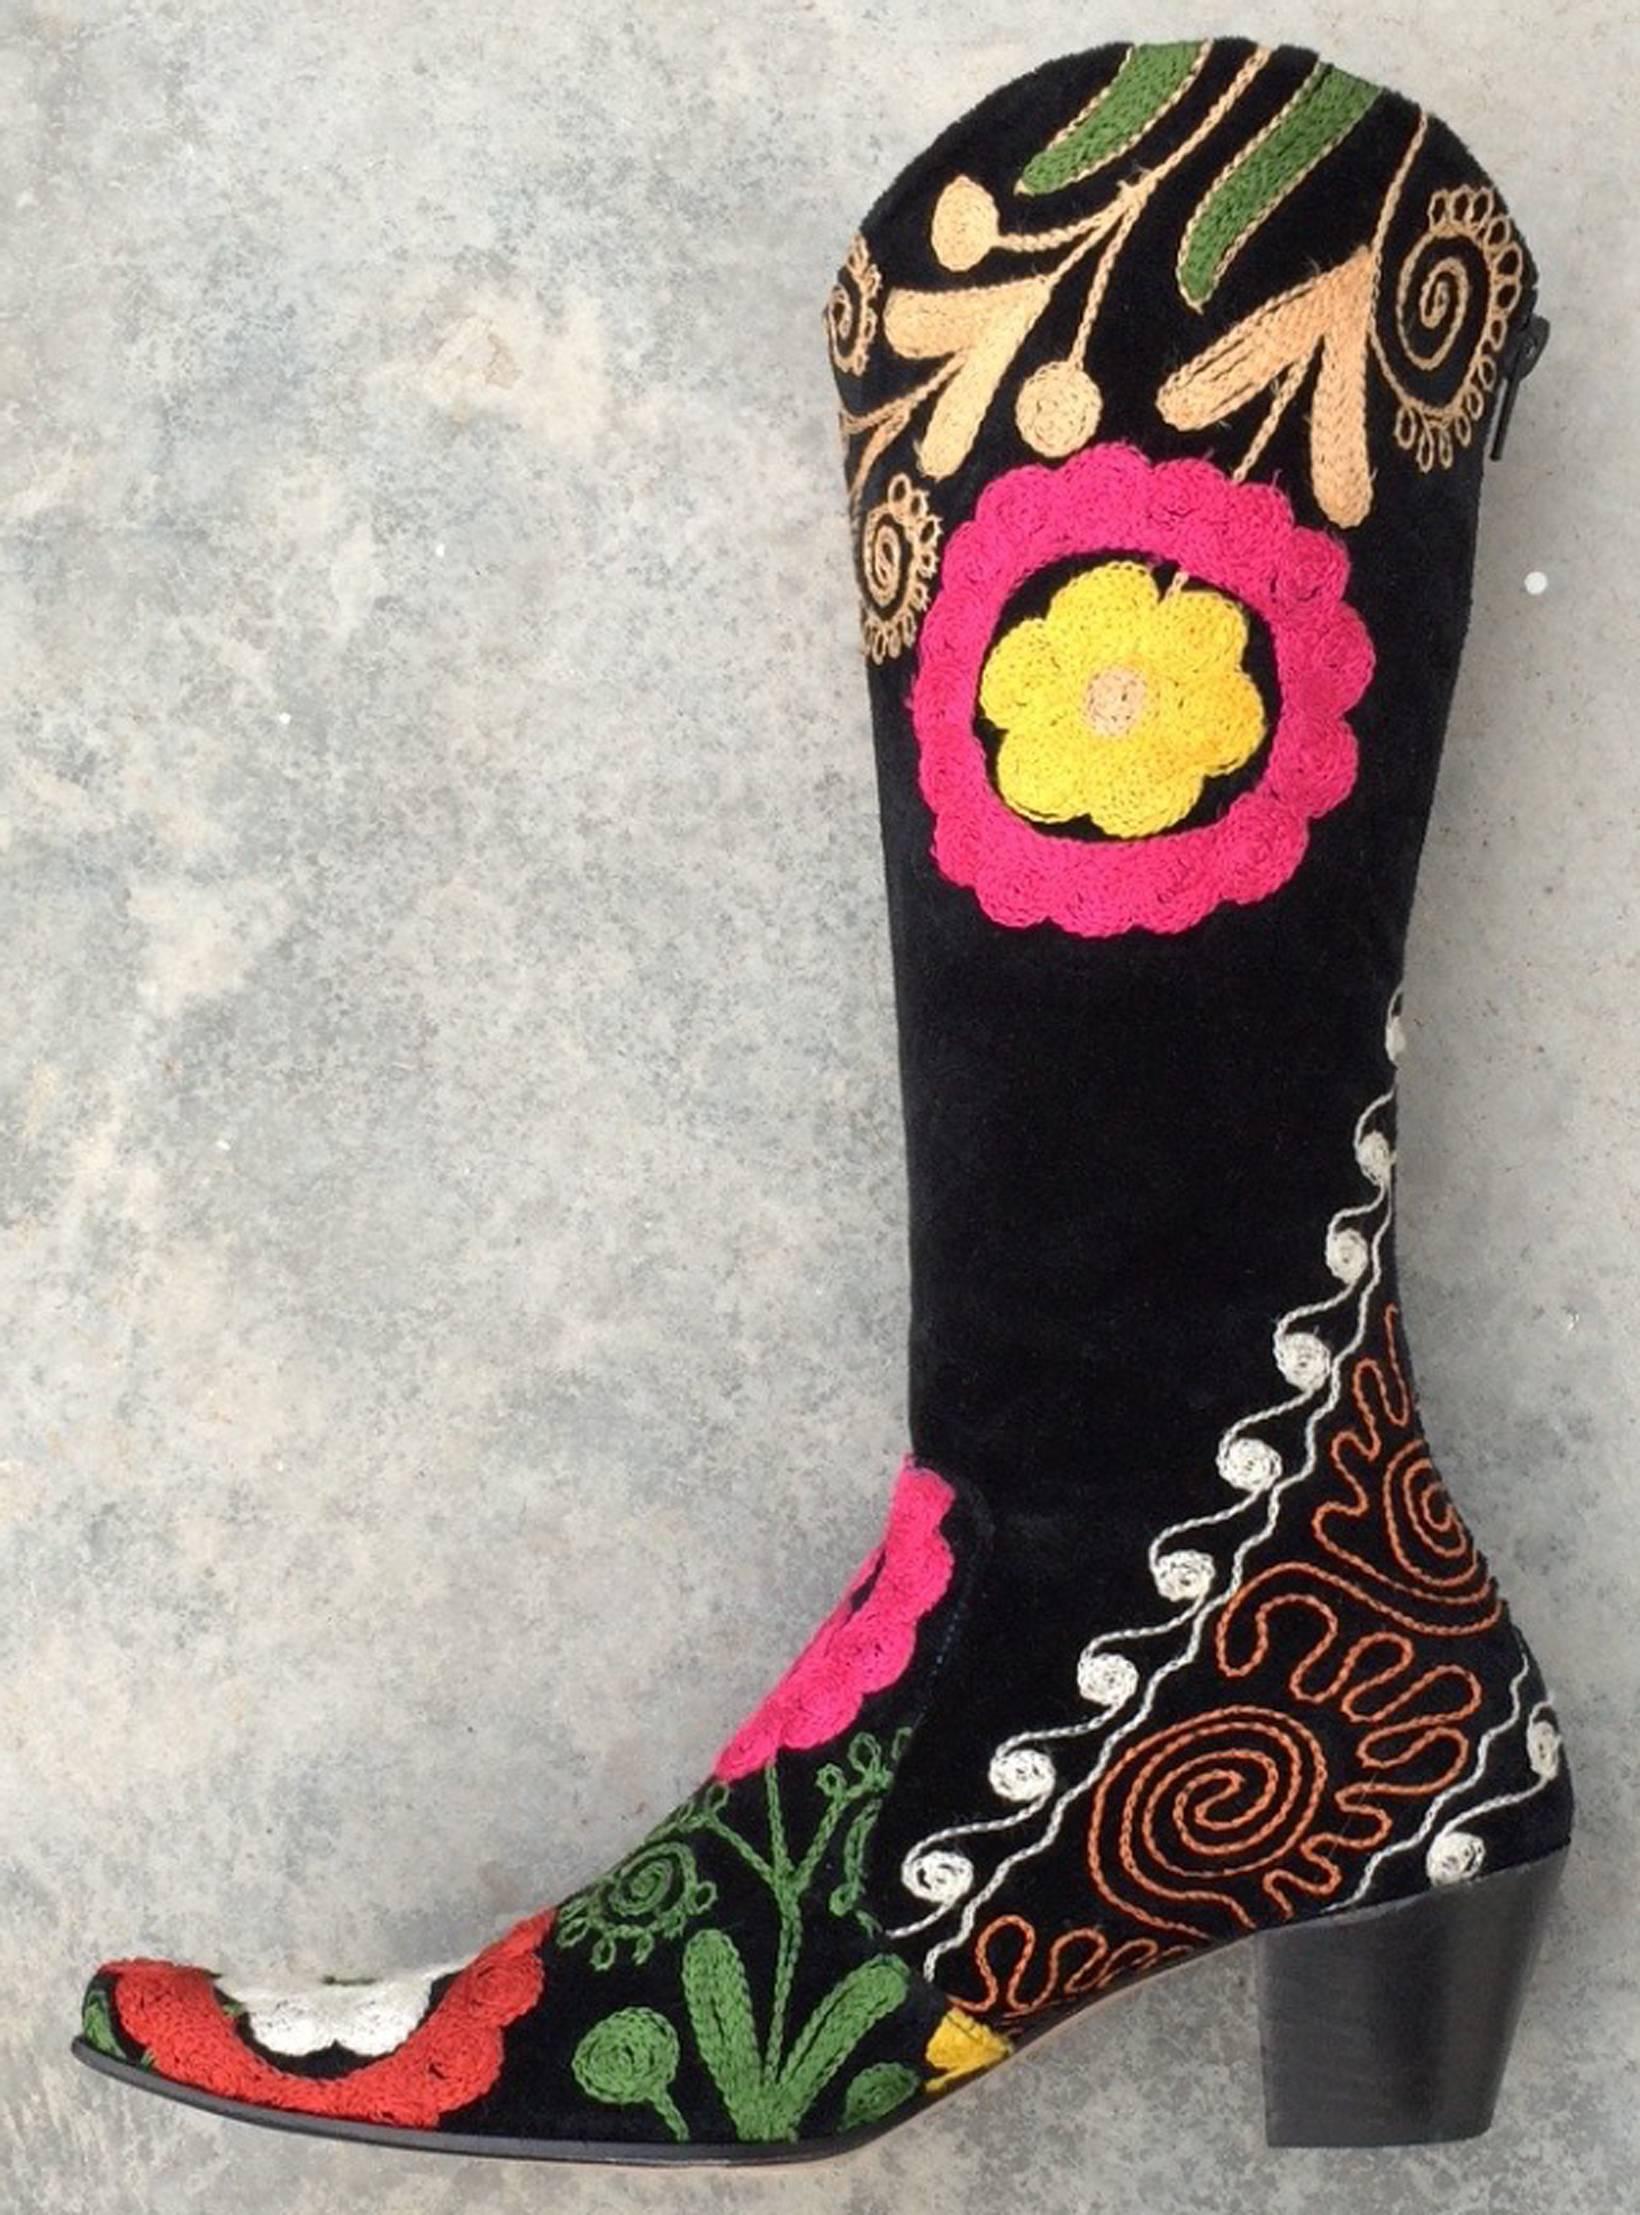 A fine vintage pair ethnic/gypsy style embroidered boots. Previously unworn items feature multi-color embroidered black velveteen uppers, calf lined interiors, leather soles and zipper closures. Items marked size 38 with 2